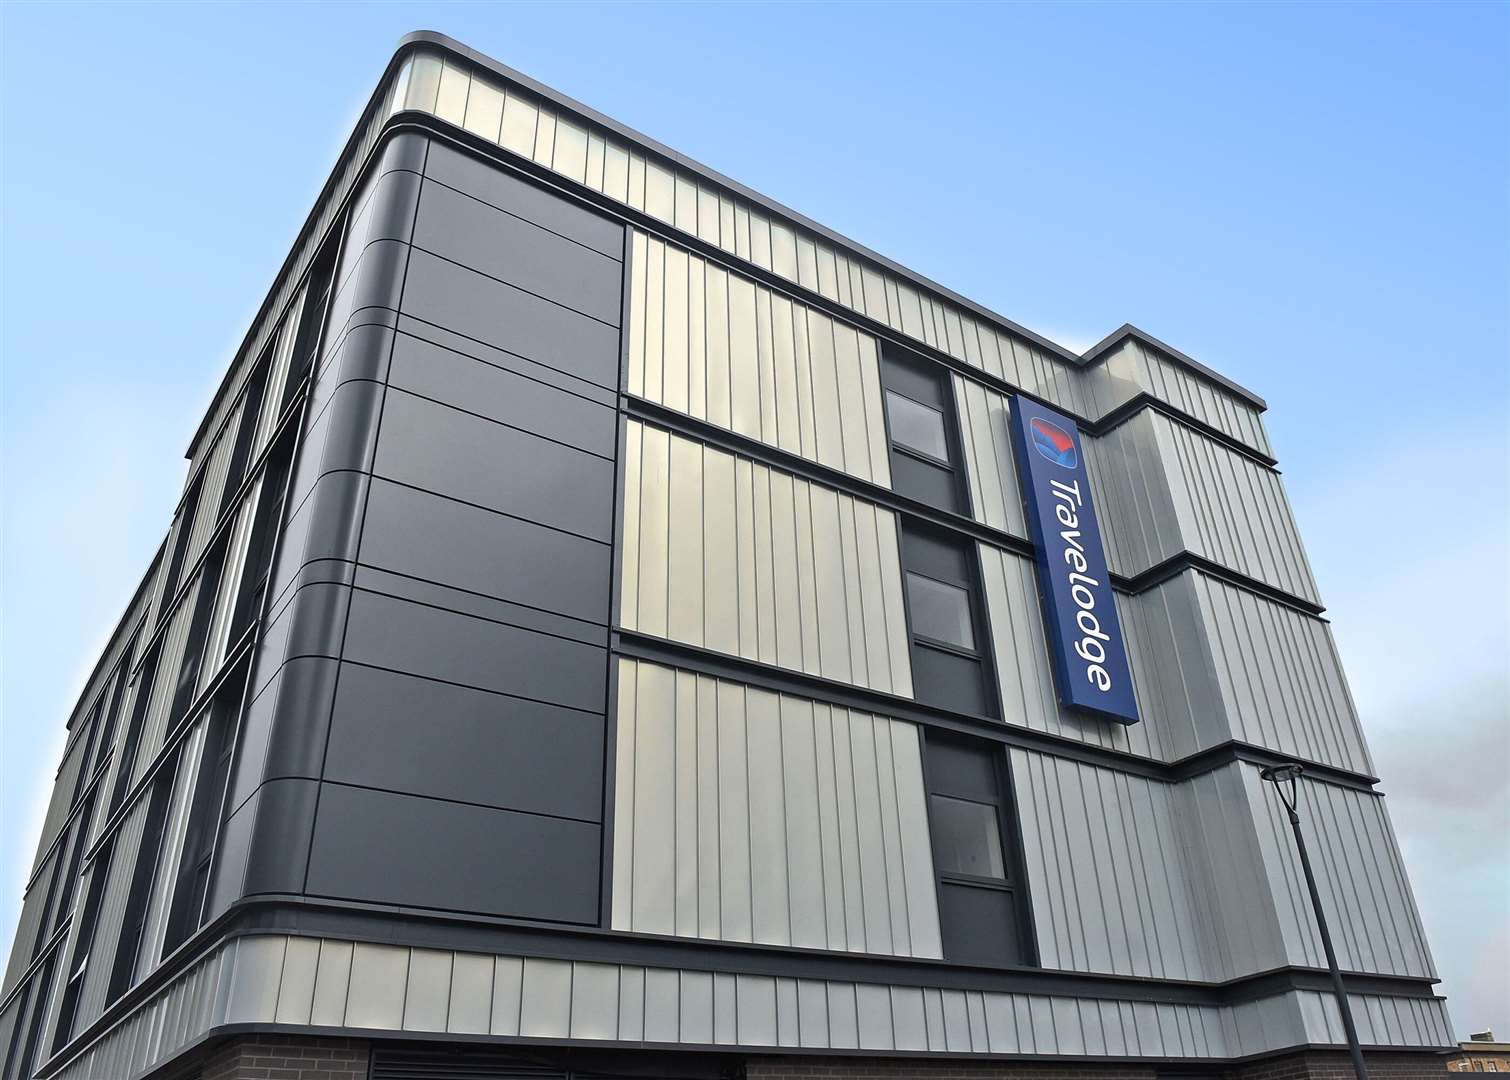 Travelodge opened a new branch in Sittingbourne shortly before the first national lockdown in March